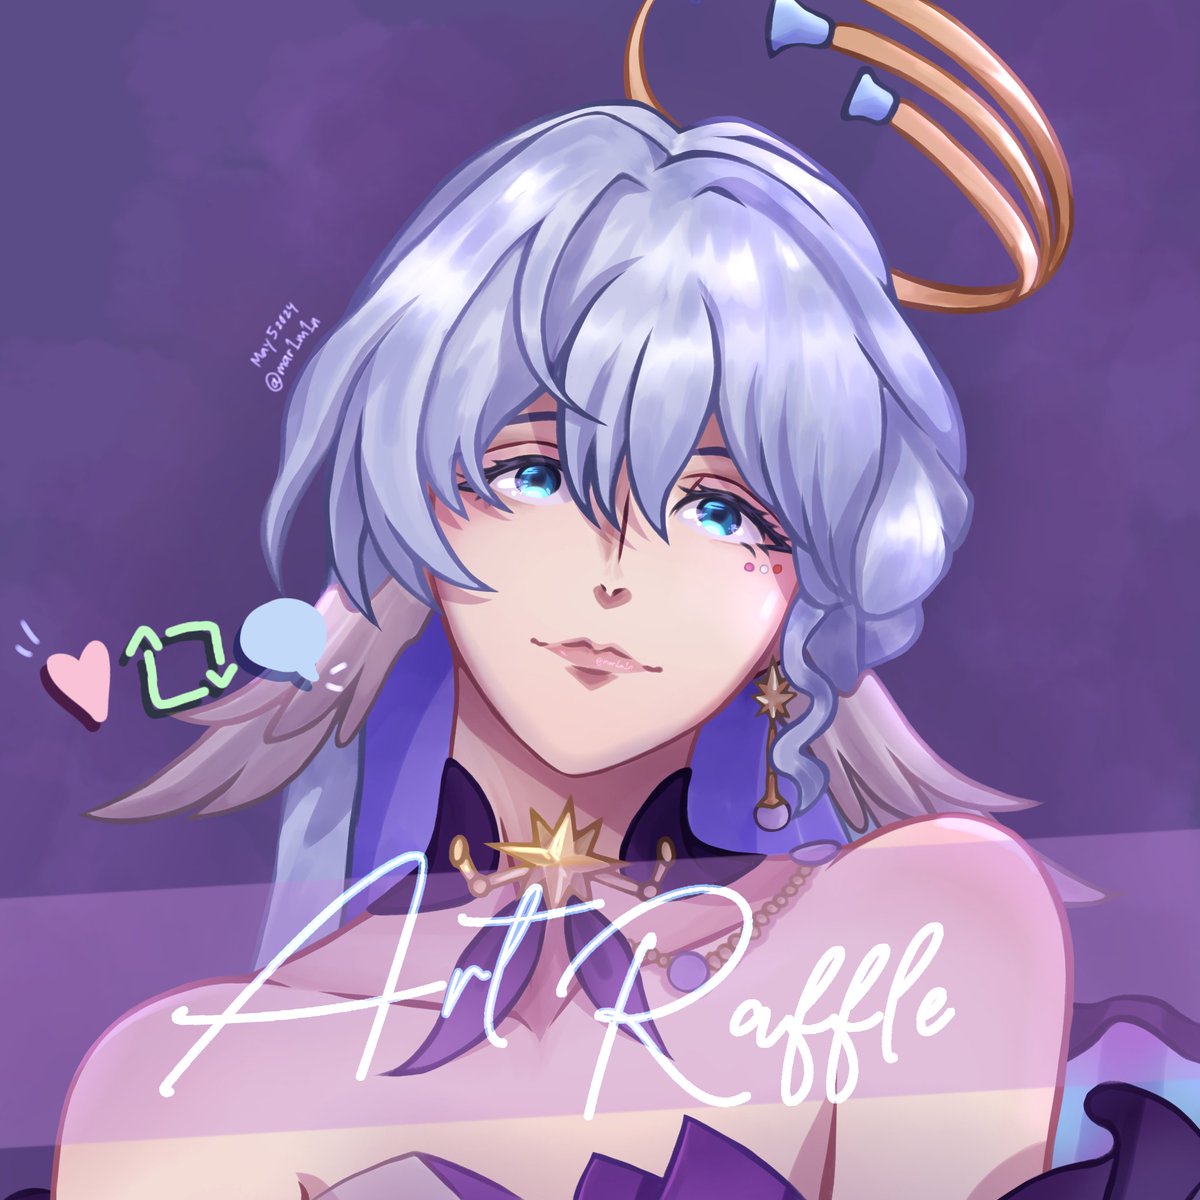 [ ART RAFFLE ] Hey! I'm hosting a new art raffle! 💐 Winner (2) gets a bust-up illustration of their oc!

To enter: 
•Like and repost this post
•Reply with your OC 

Winners will be announced on May 20 🫶🎉

#artraffle #artmoots #ArtistsOfTwitter #artph #oc #digitalart